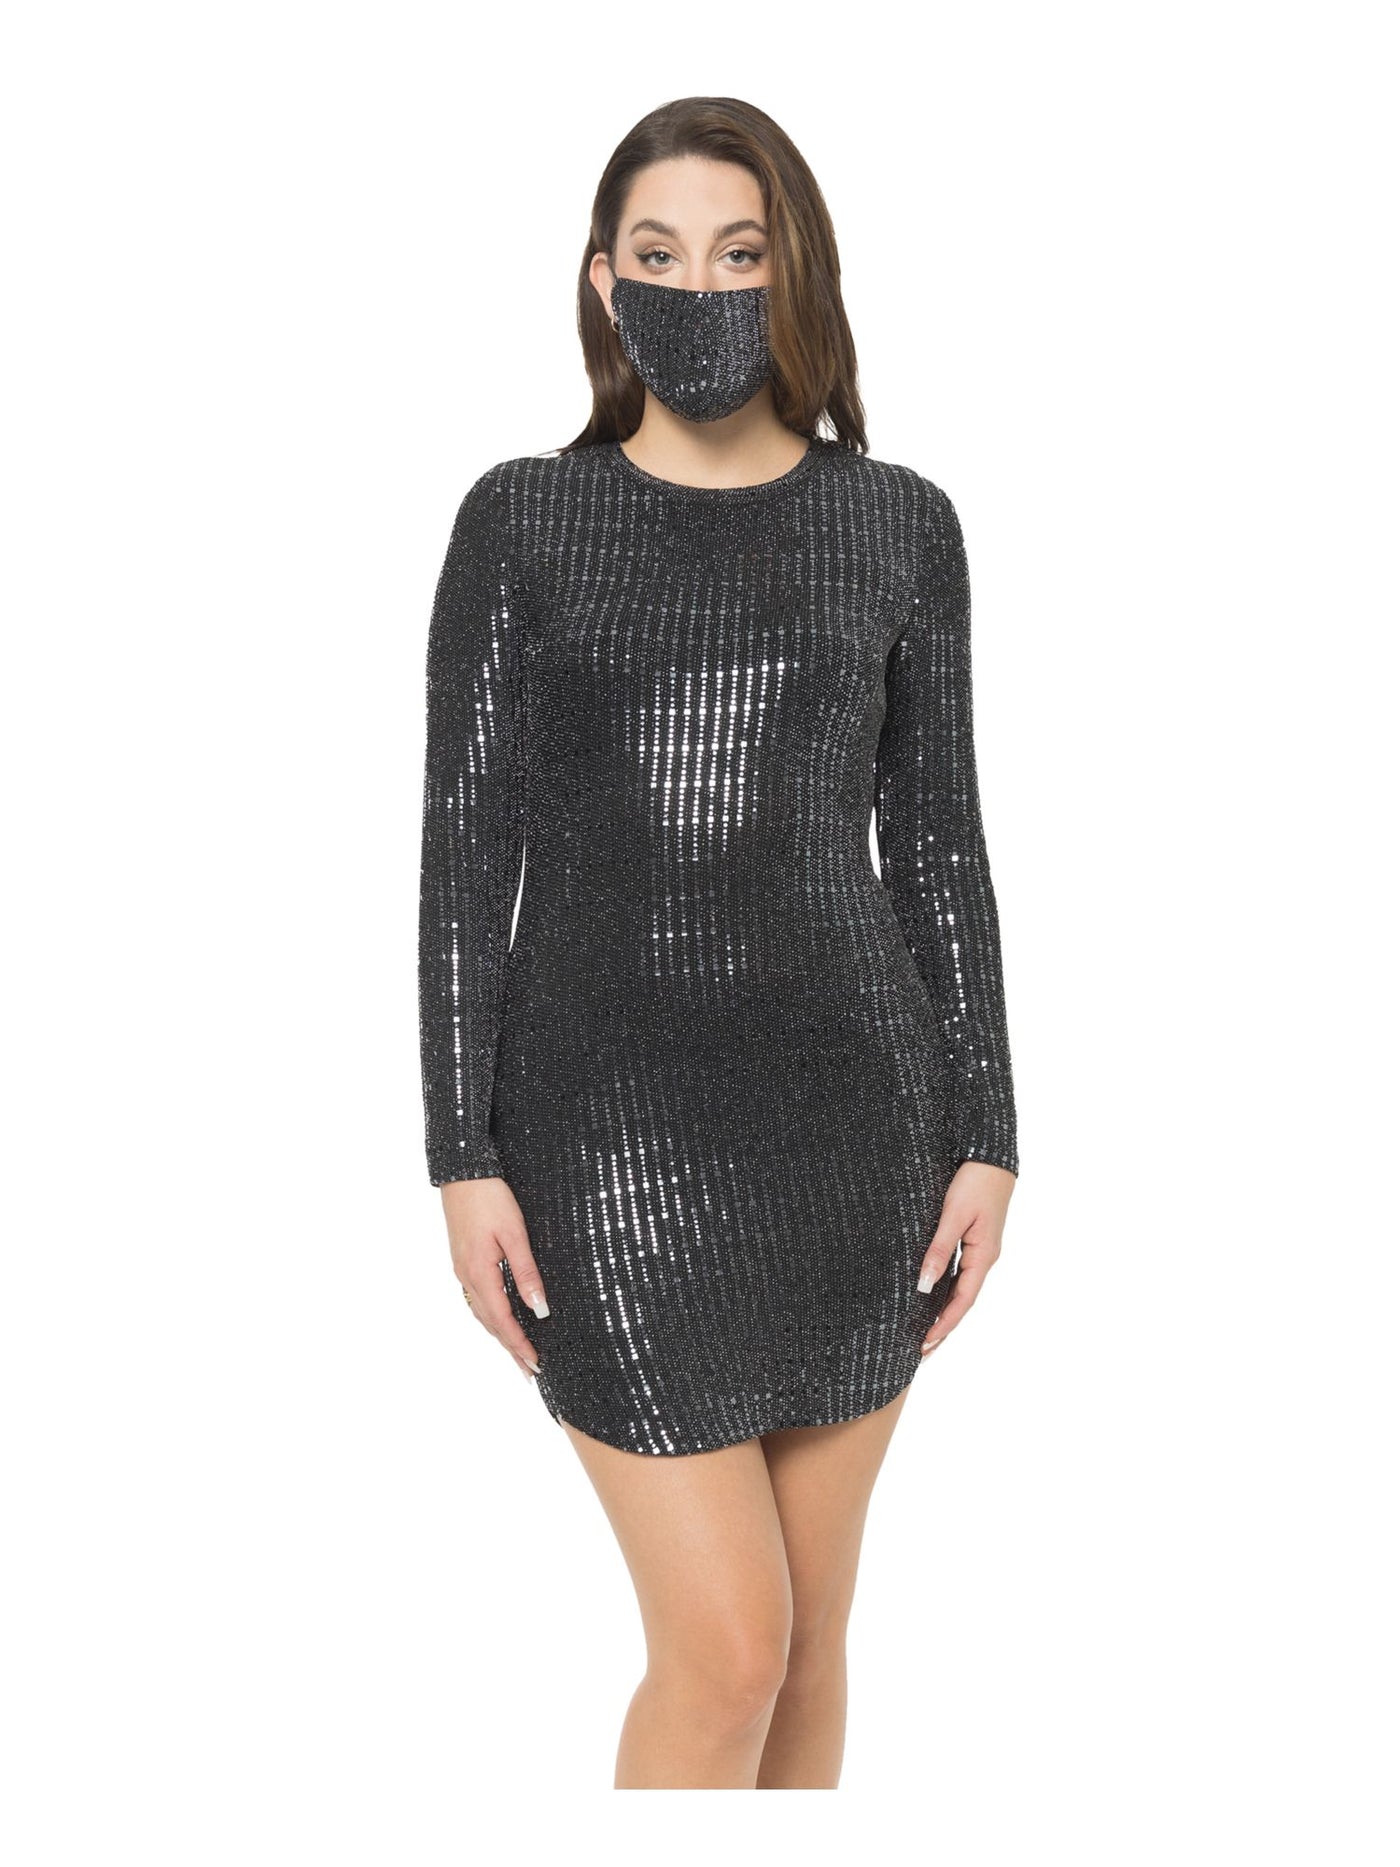 B DARLIN Womens Black Sequined With Mask Long Sleeve Crew Neck Micro Mini Evening Body Con Dress Juniors XS